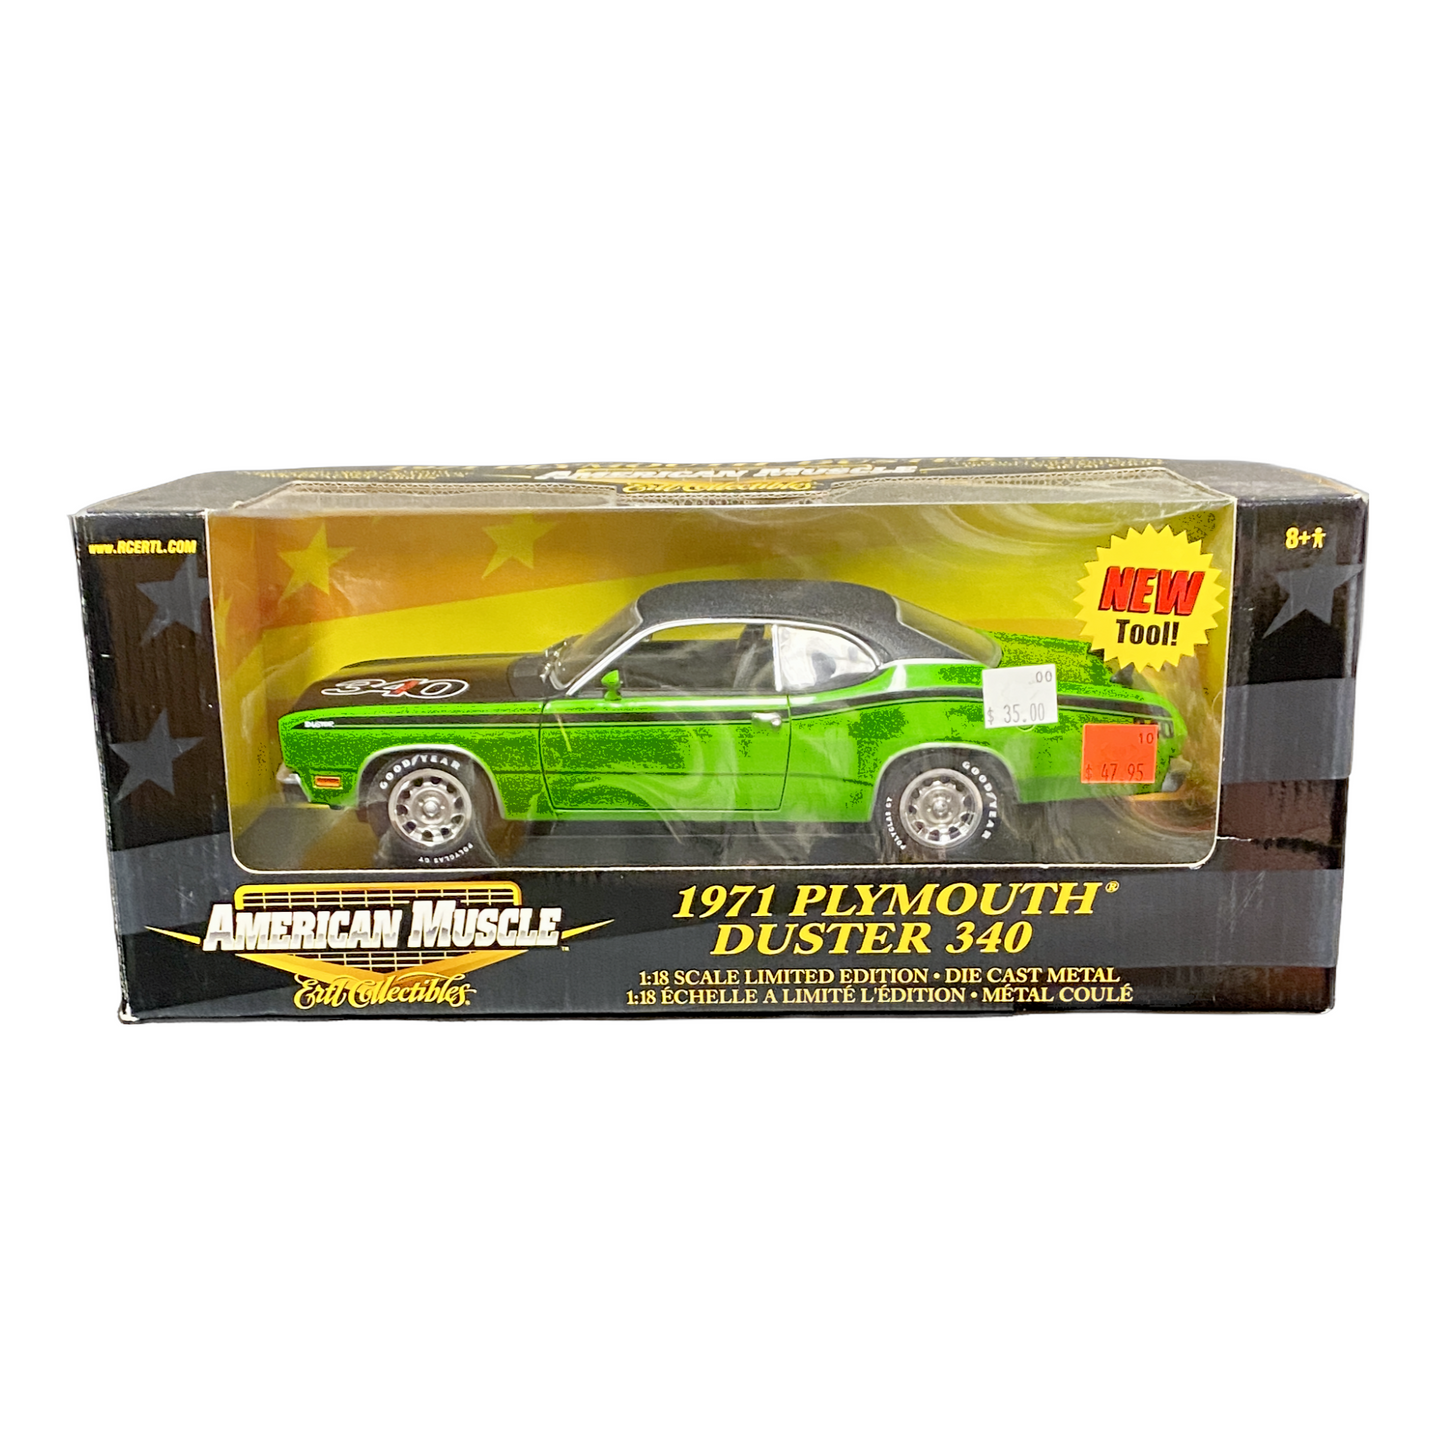 1/18 Scale 1971 Plymouth Duster 340 Green/ Black hood and roof - Ertl Collectibles